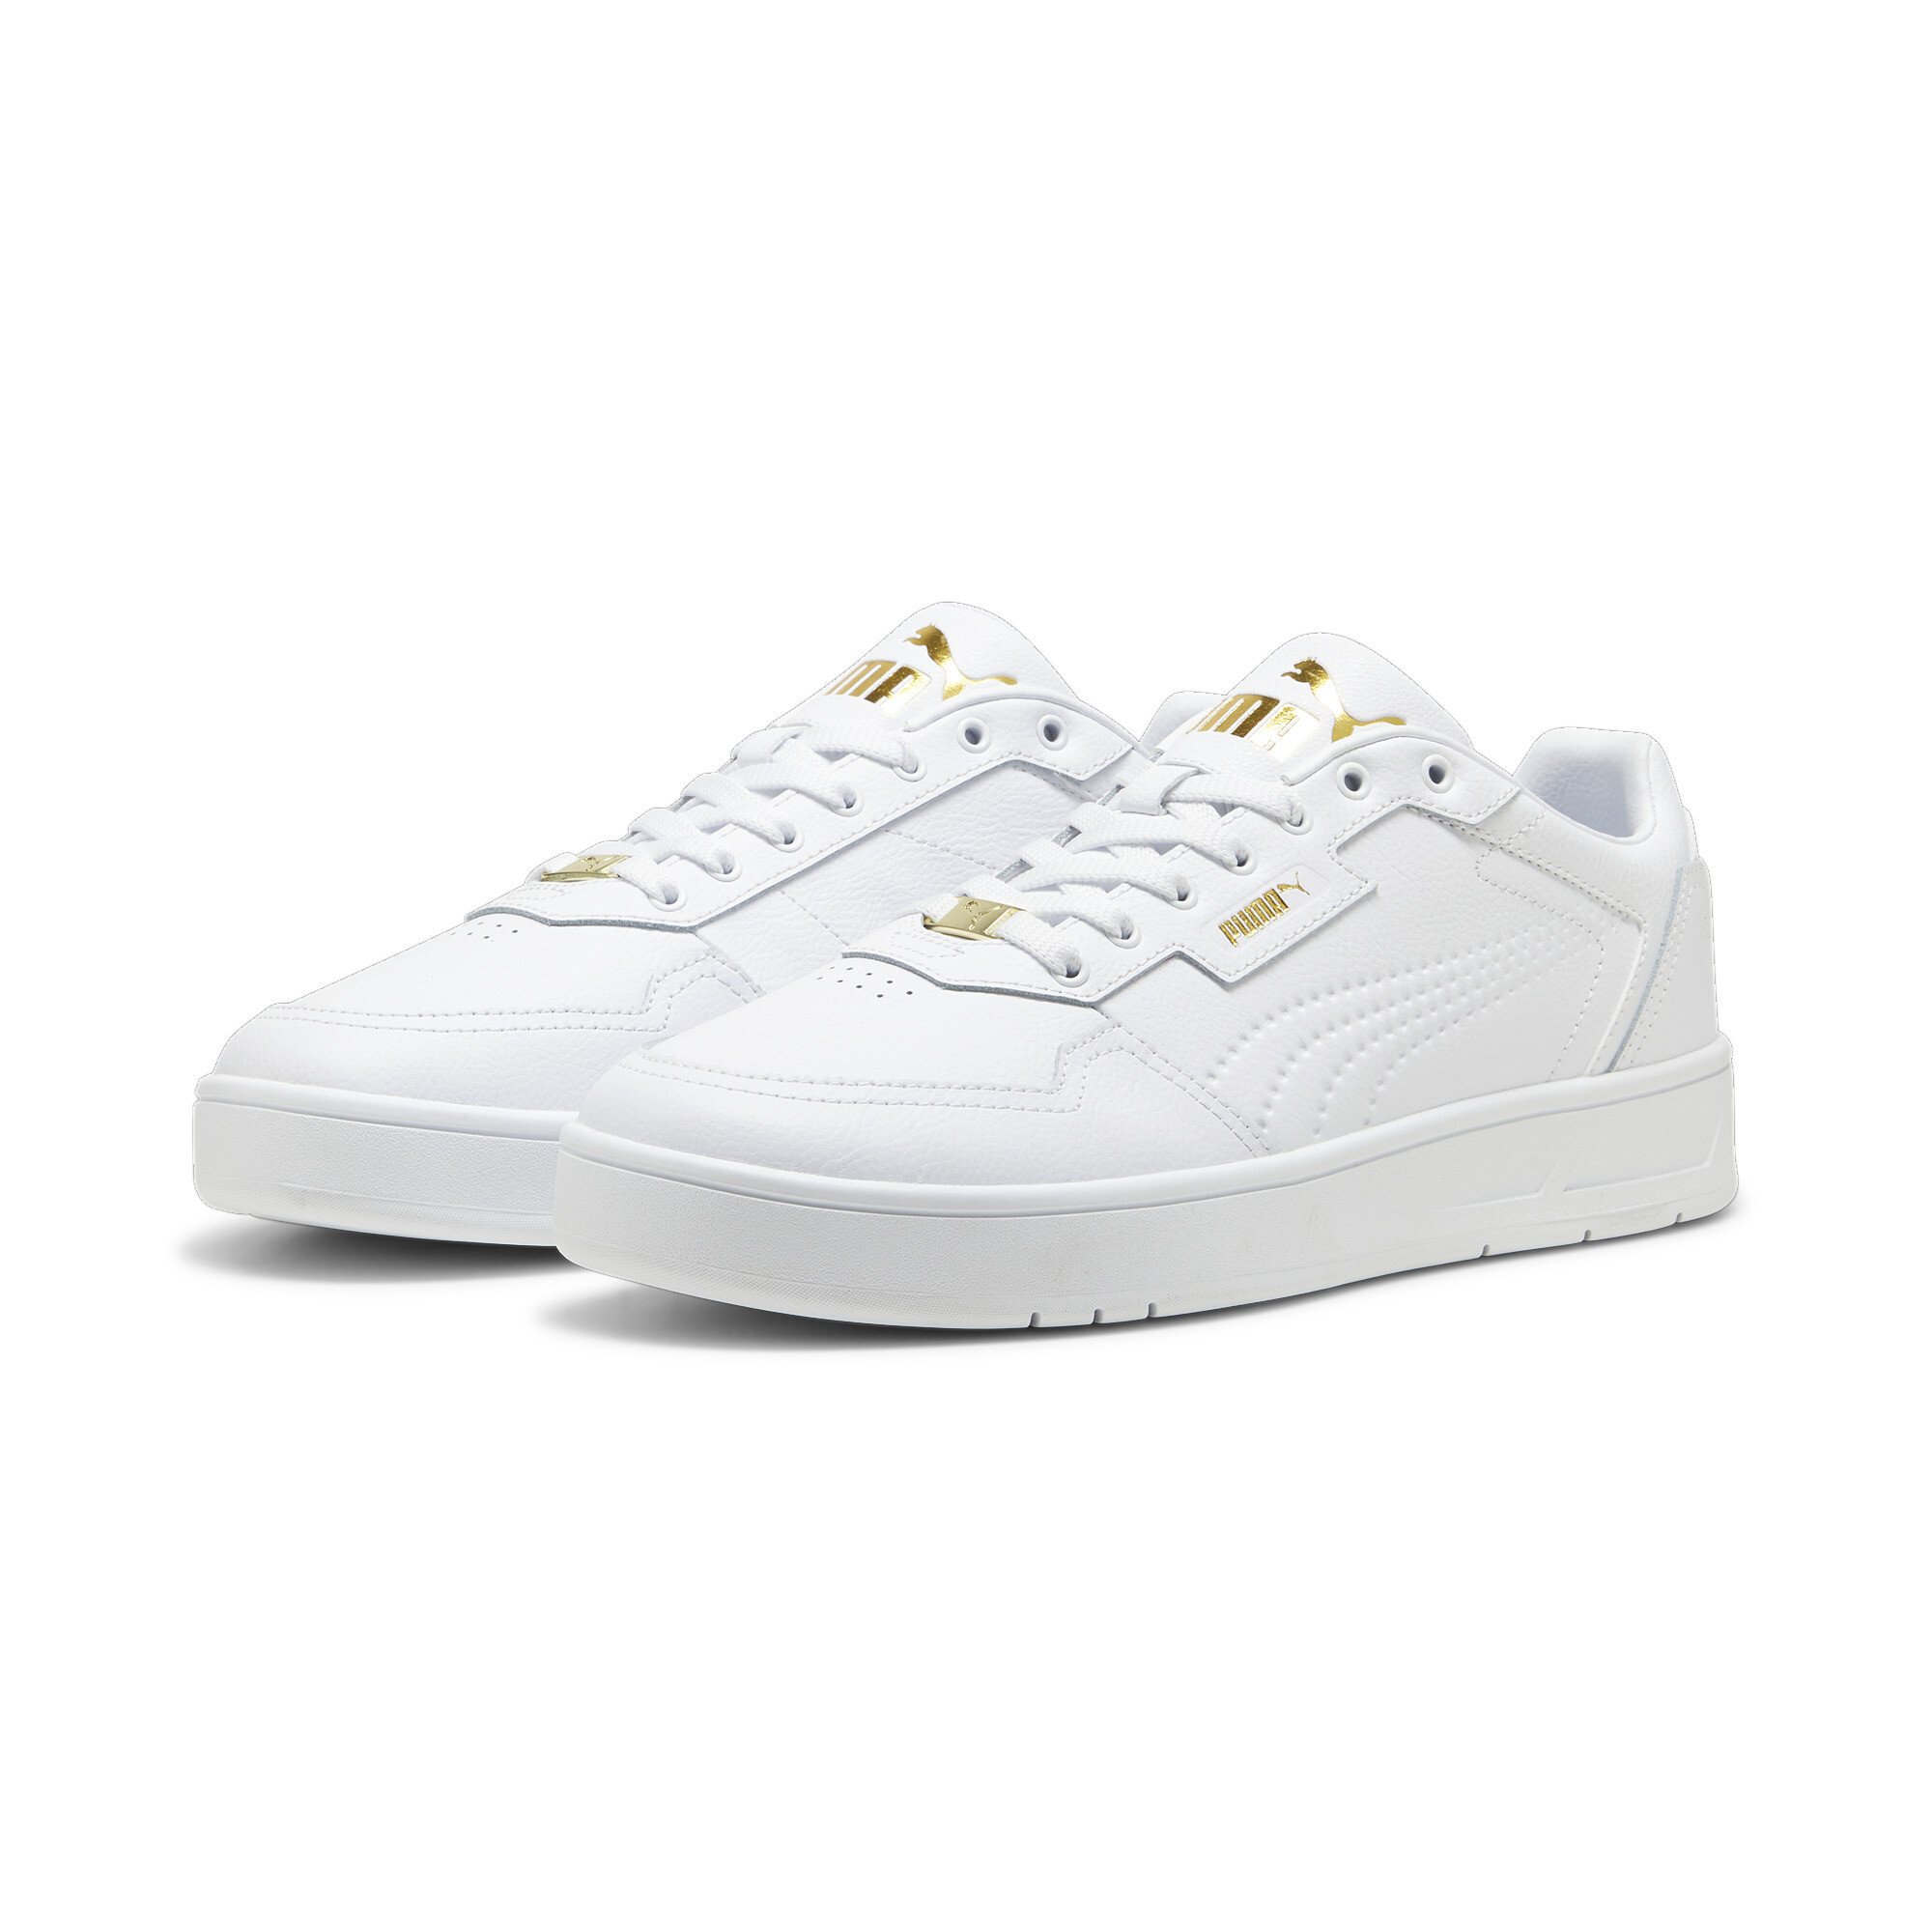 Puma Court Classic Lux Sneakers, White, Size 37.5, Shoes